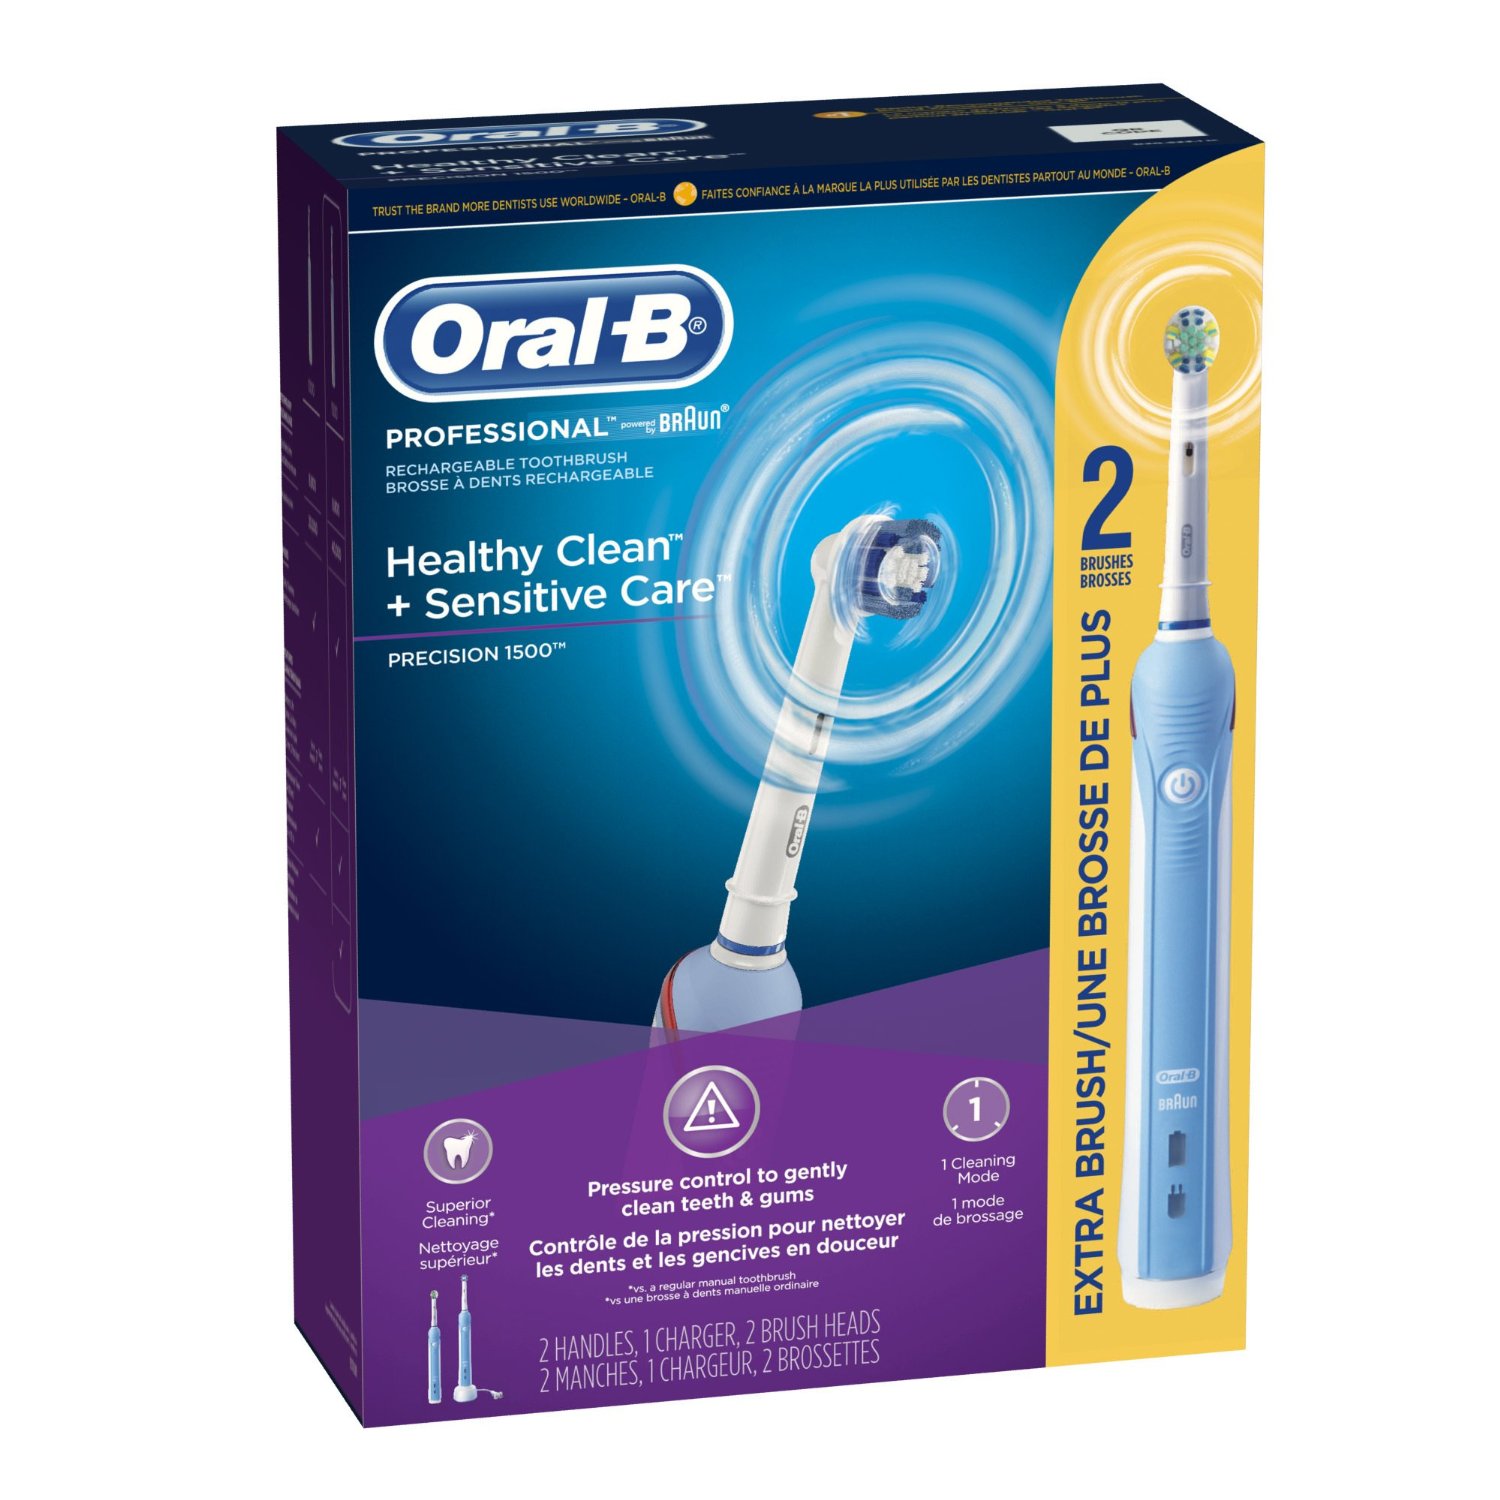 Save $15 on Select Oral-B Power Toothbrushes via Mail-in-Rebate